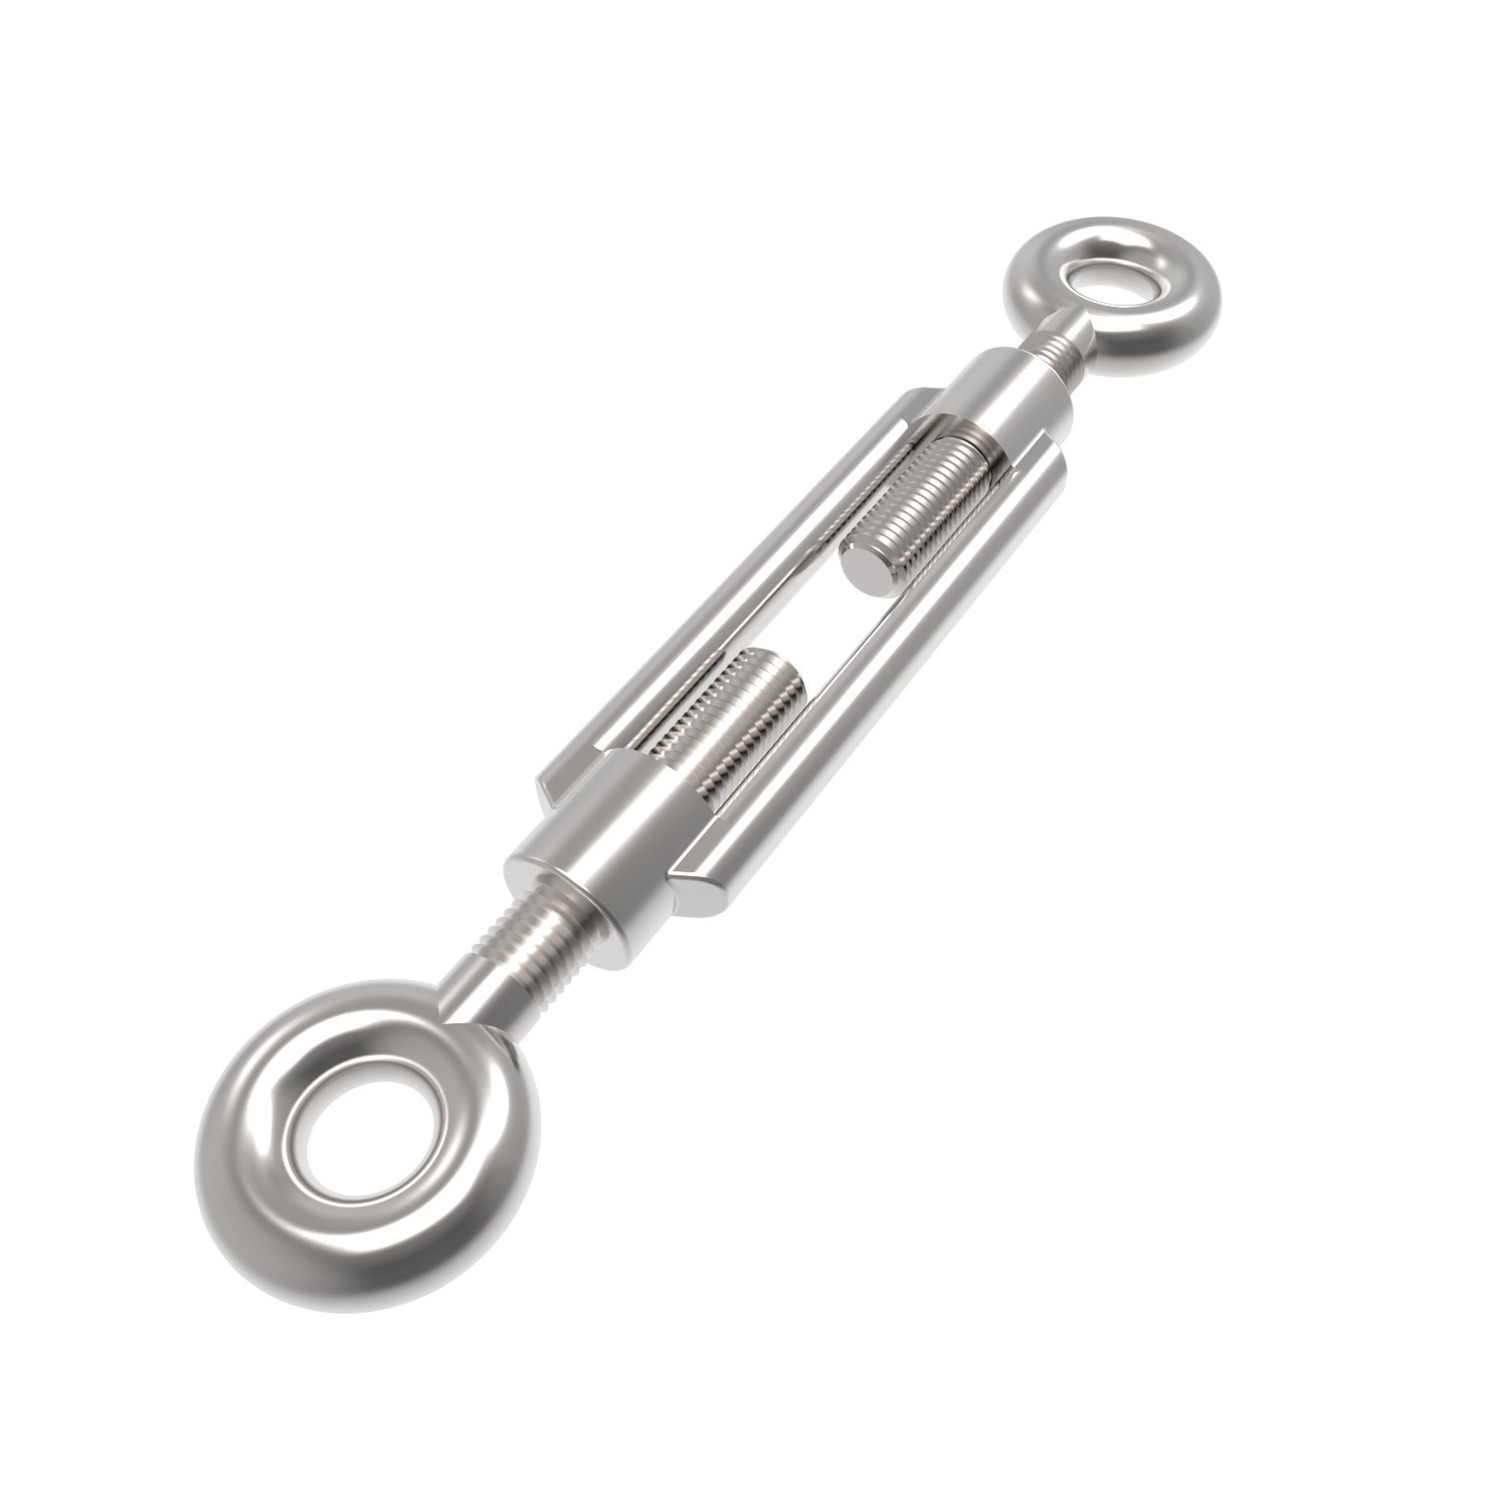 Eye End Turnbuckles Steel turnbuckles manufactured to DIN 1480 eye to eye. Sizes ranging from M6 to M48. Lengths from 110mm to 355mm.